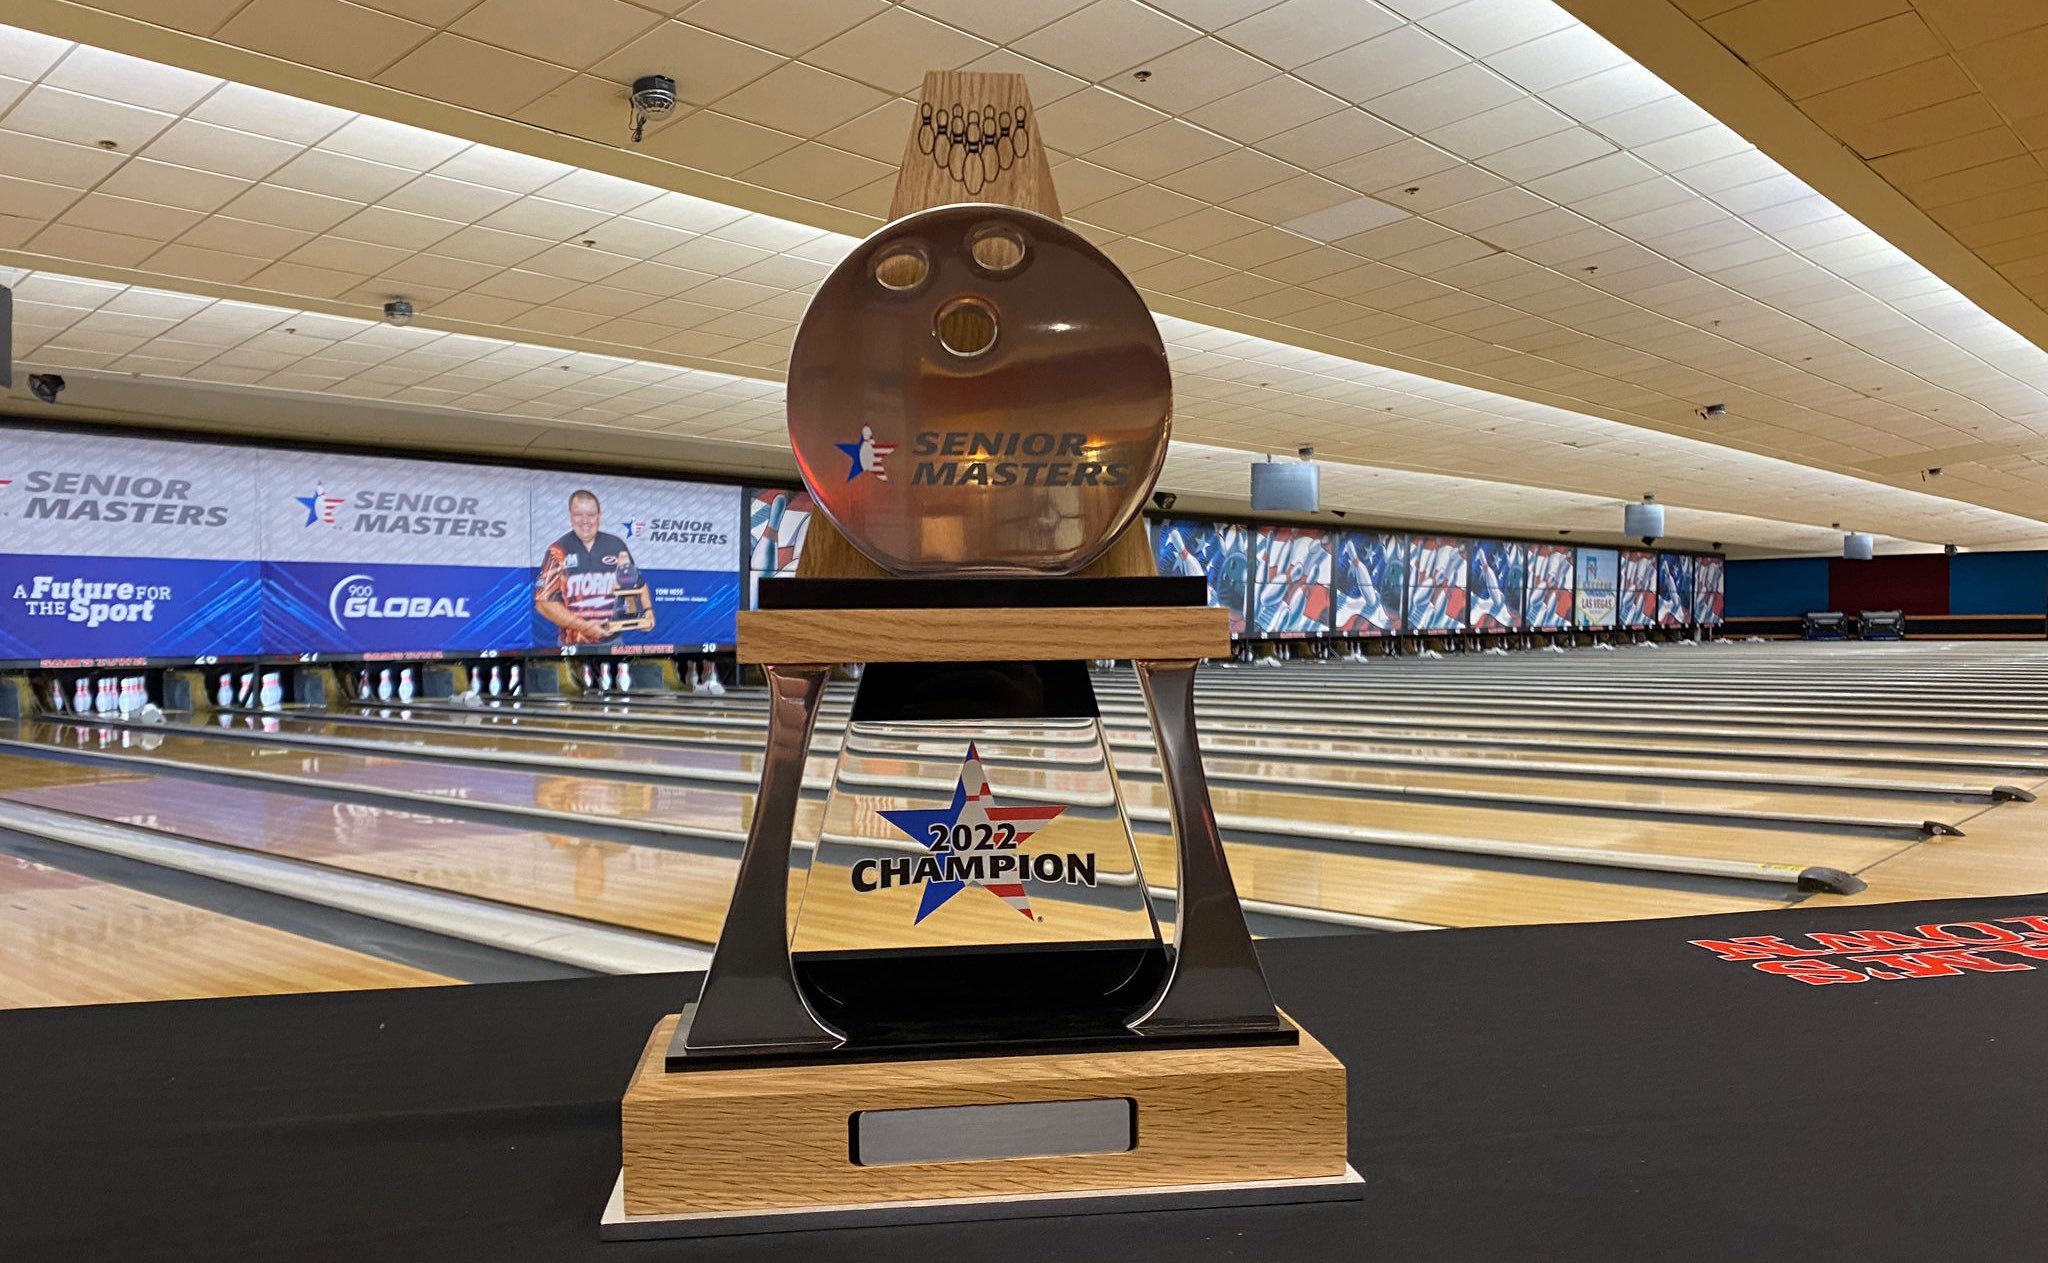 USBC on Twitter "🏆 Who takes home the hardware?! The 2022 Senior